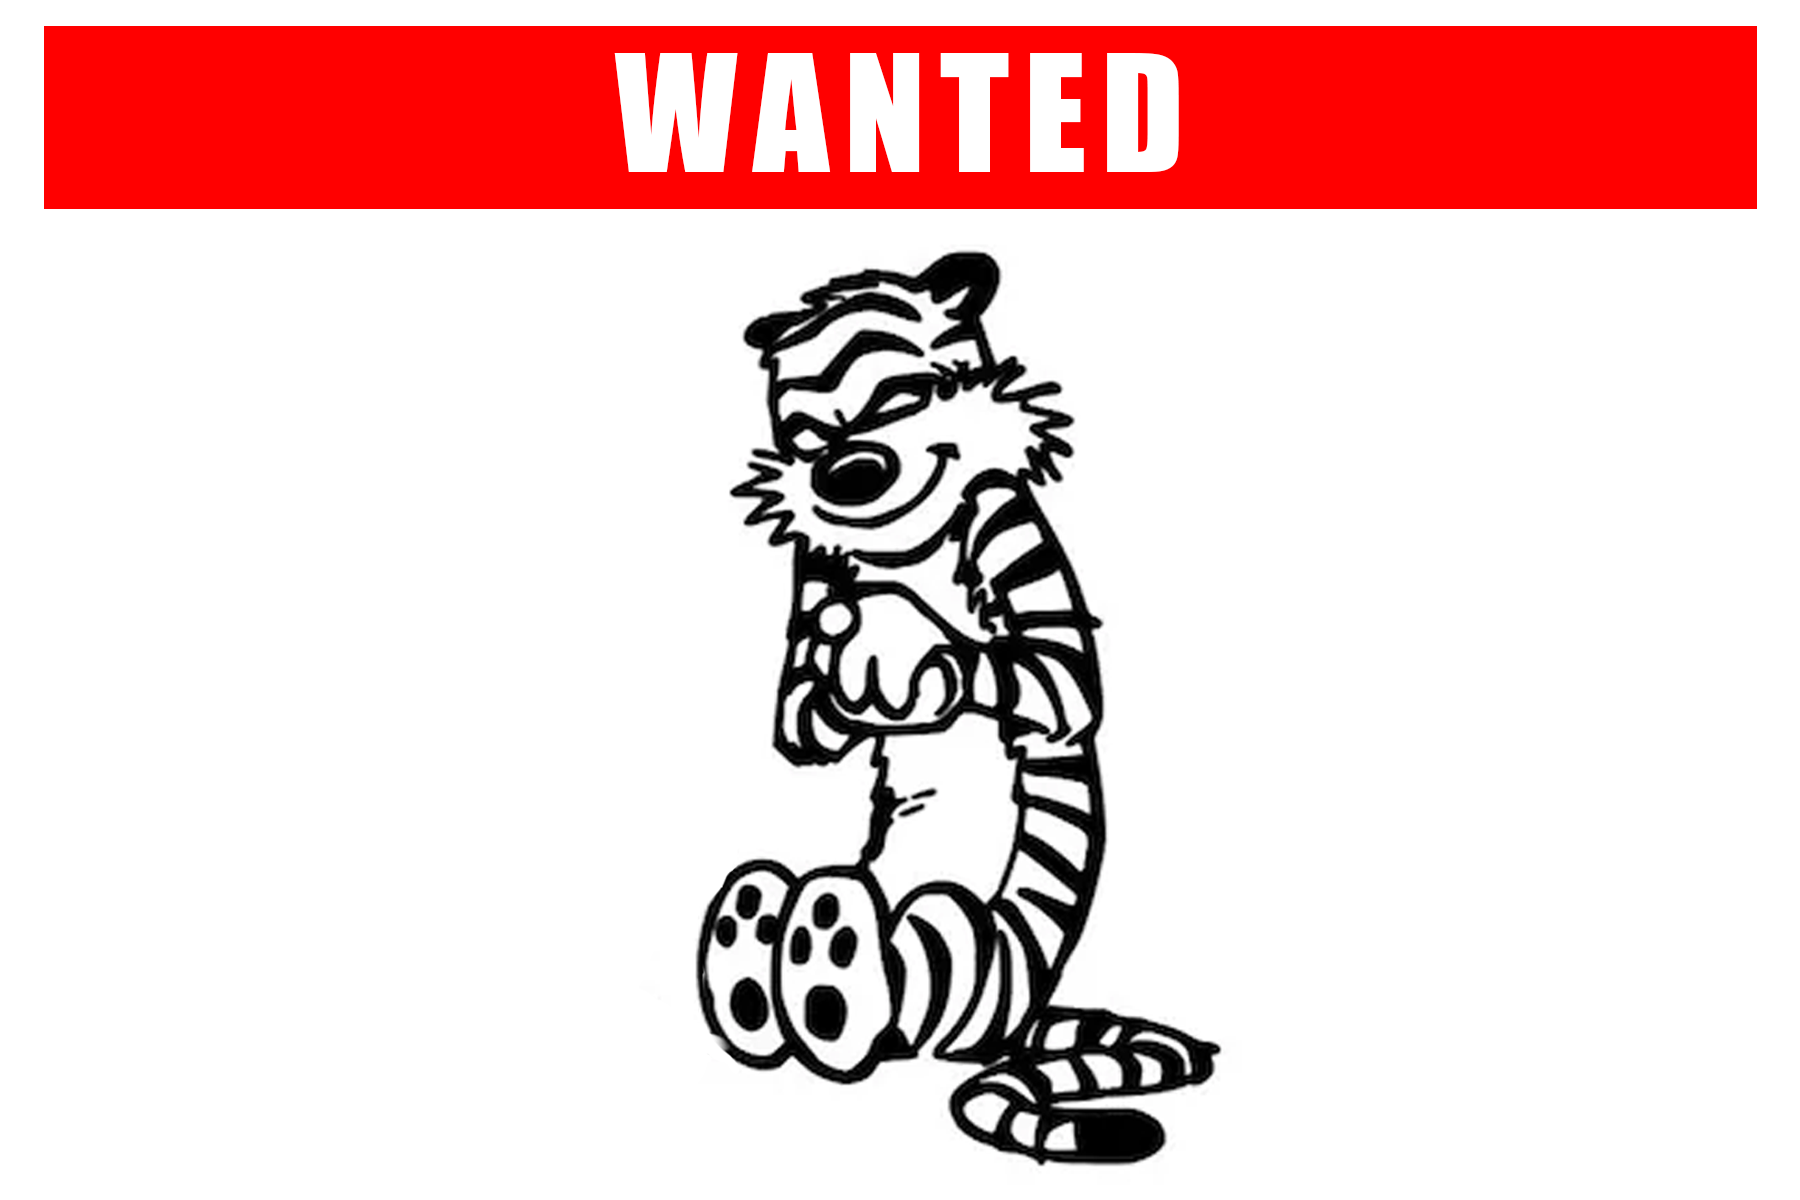 hobbes_wanted